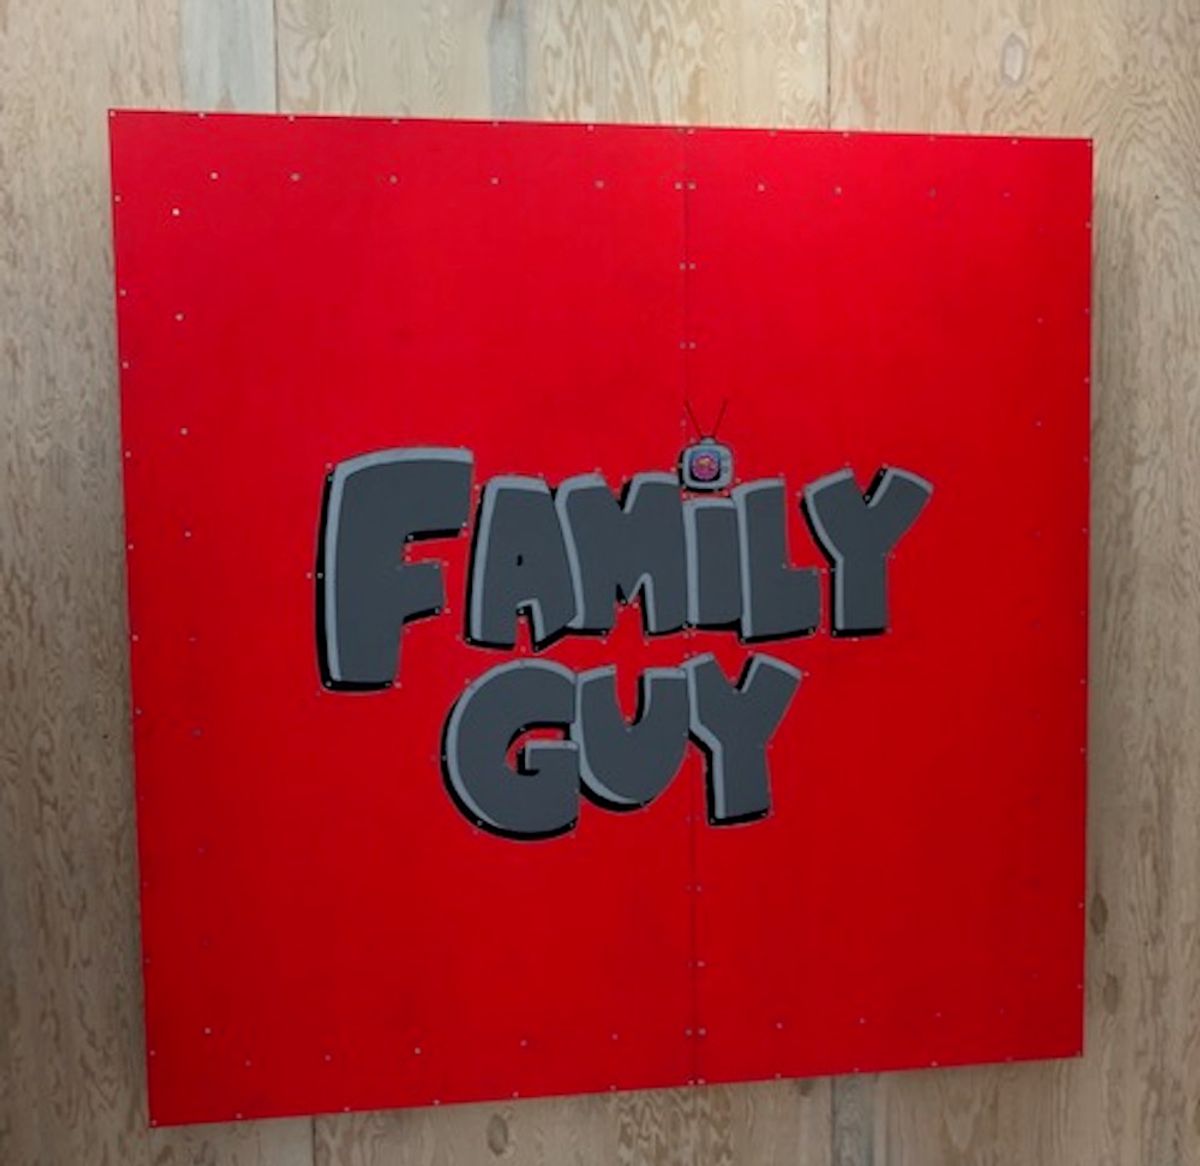 Tom Sachs has used marquetry to pay homage to sitcom Family Guy Gareth Harris